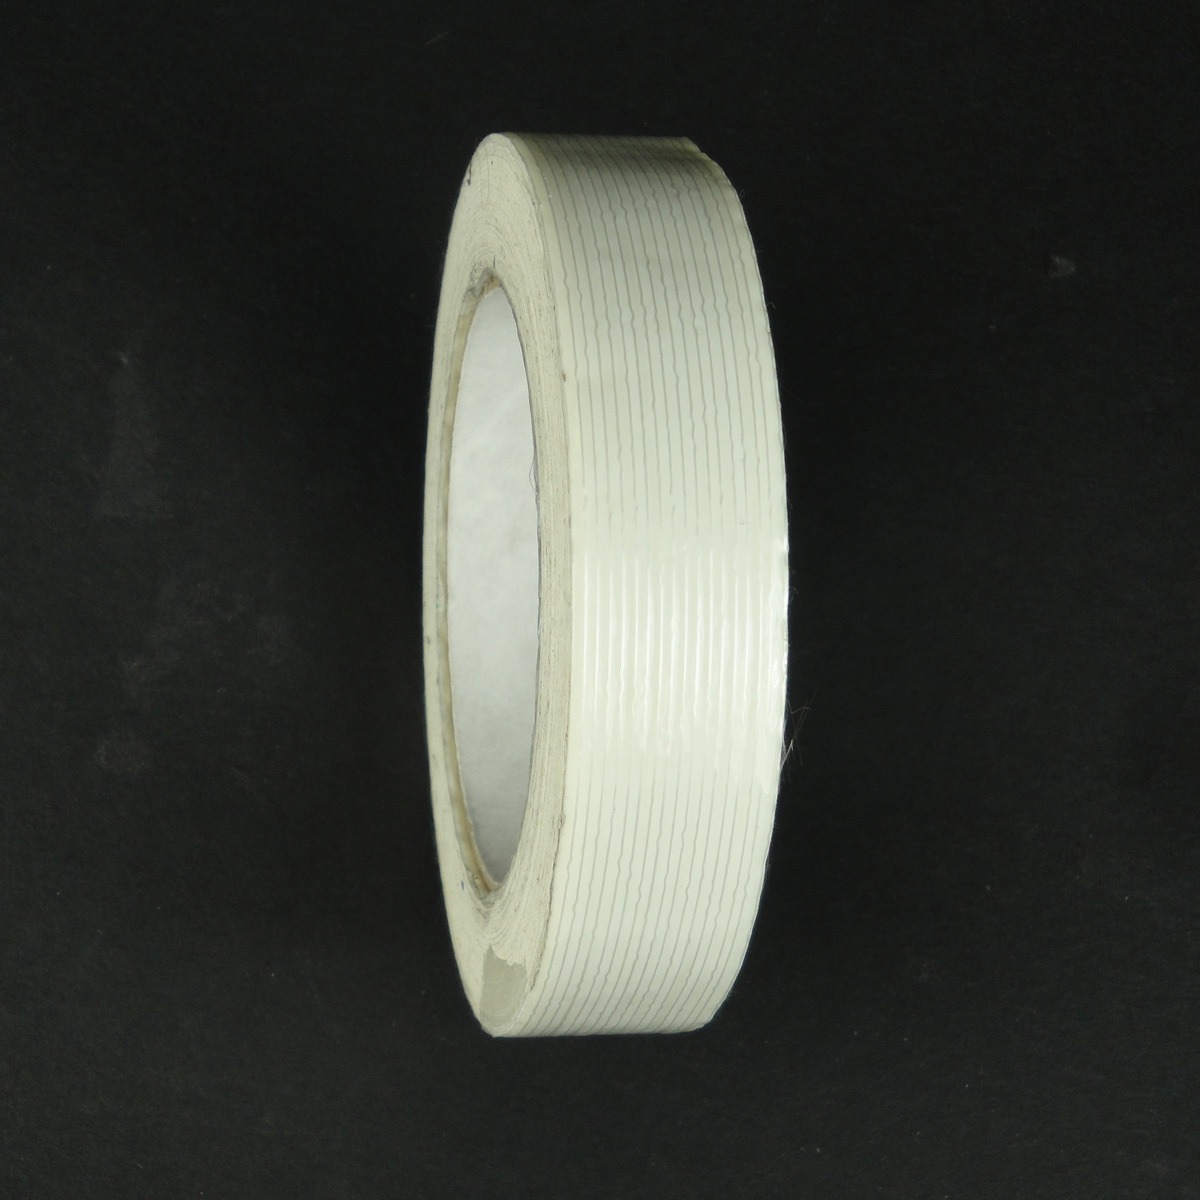 Clear Filament Strapping Tape 2 Inch x 60 Yard Made in the USA Brixwell FST20060C-XCP2 2 Rolls 